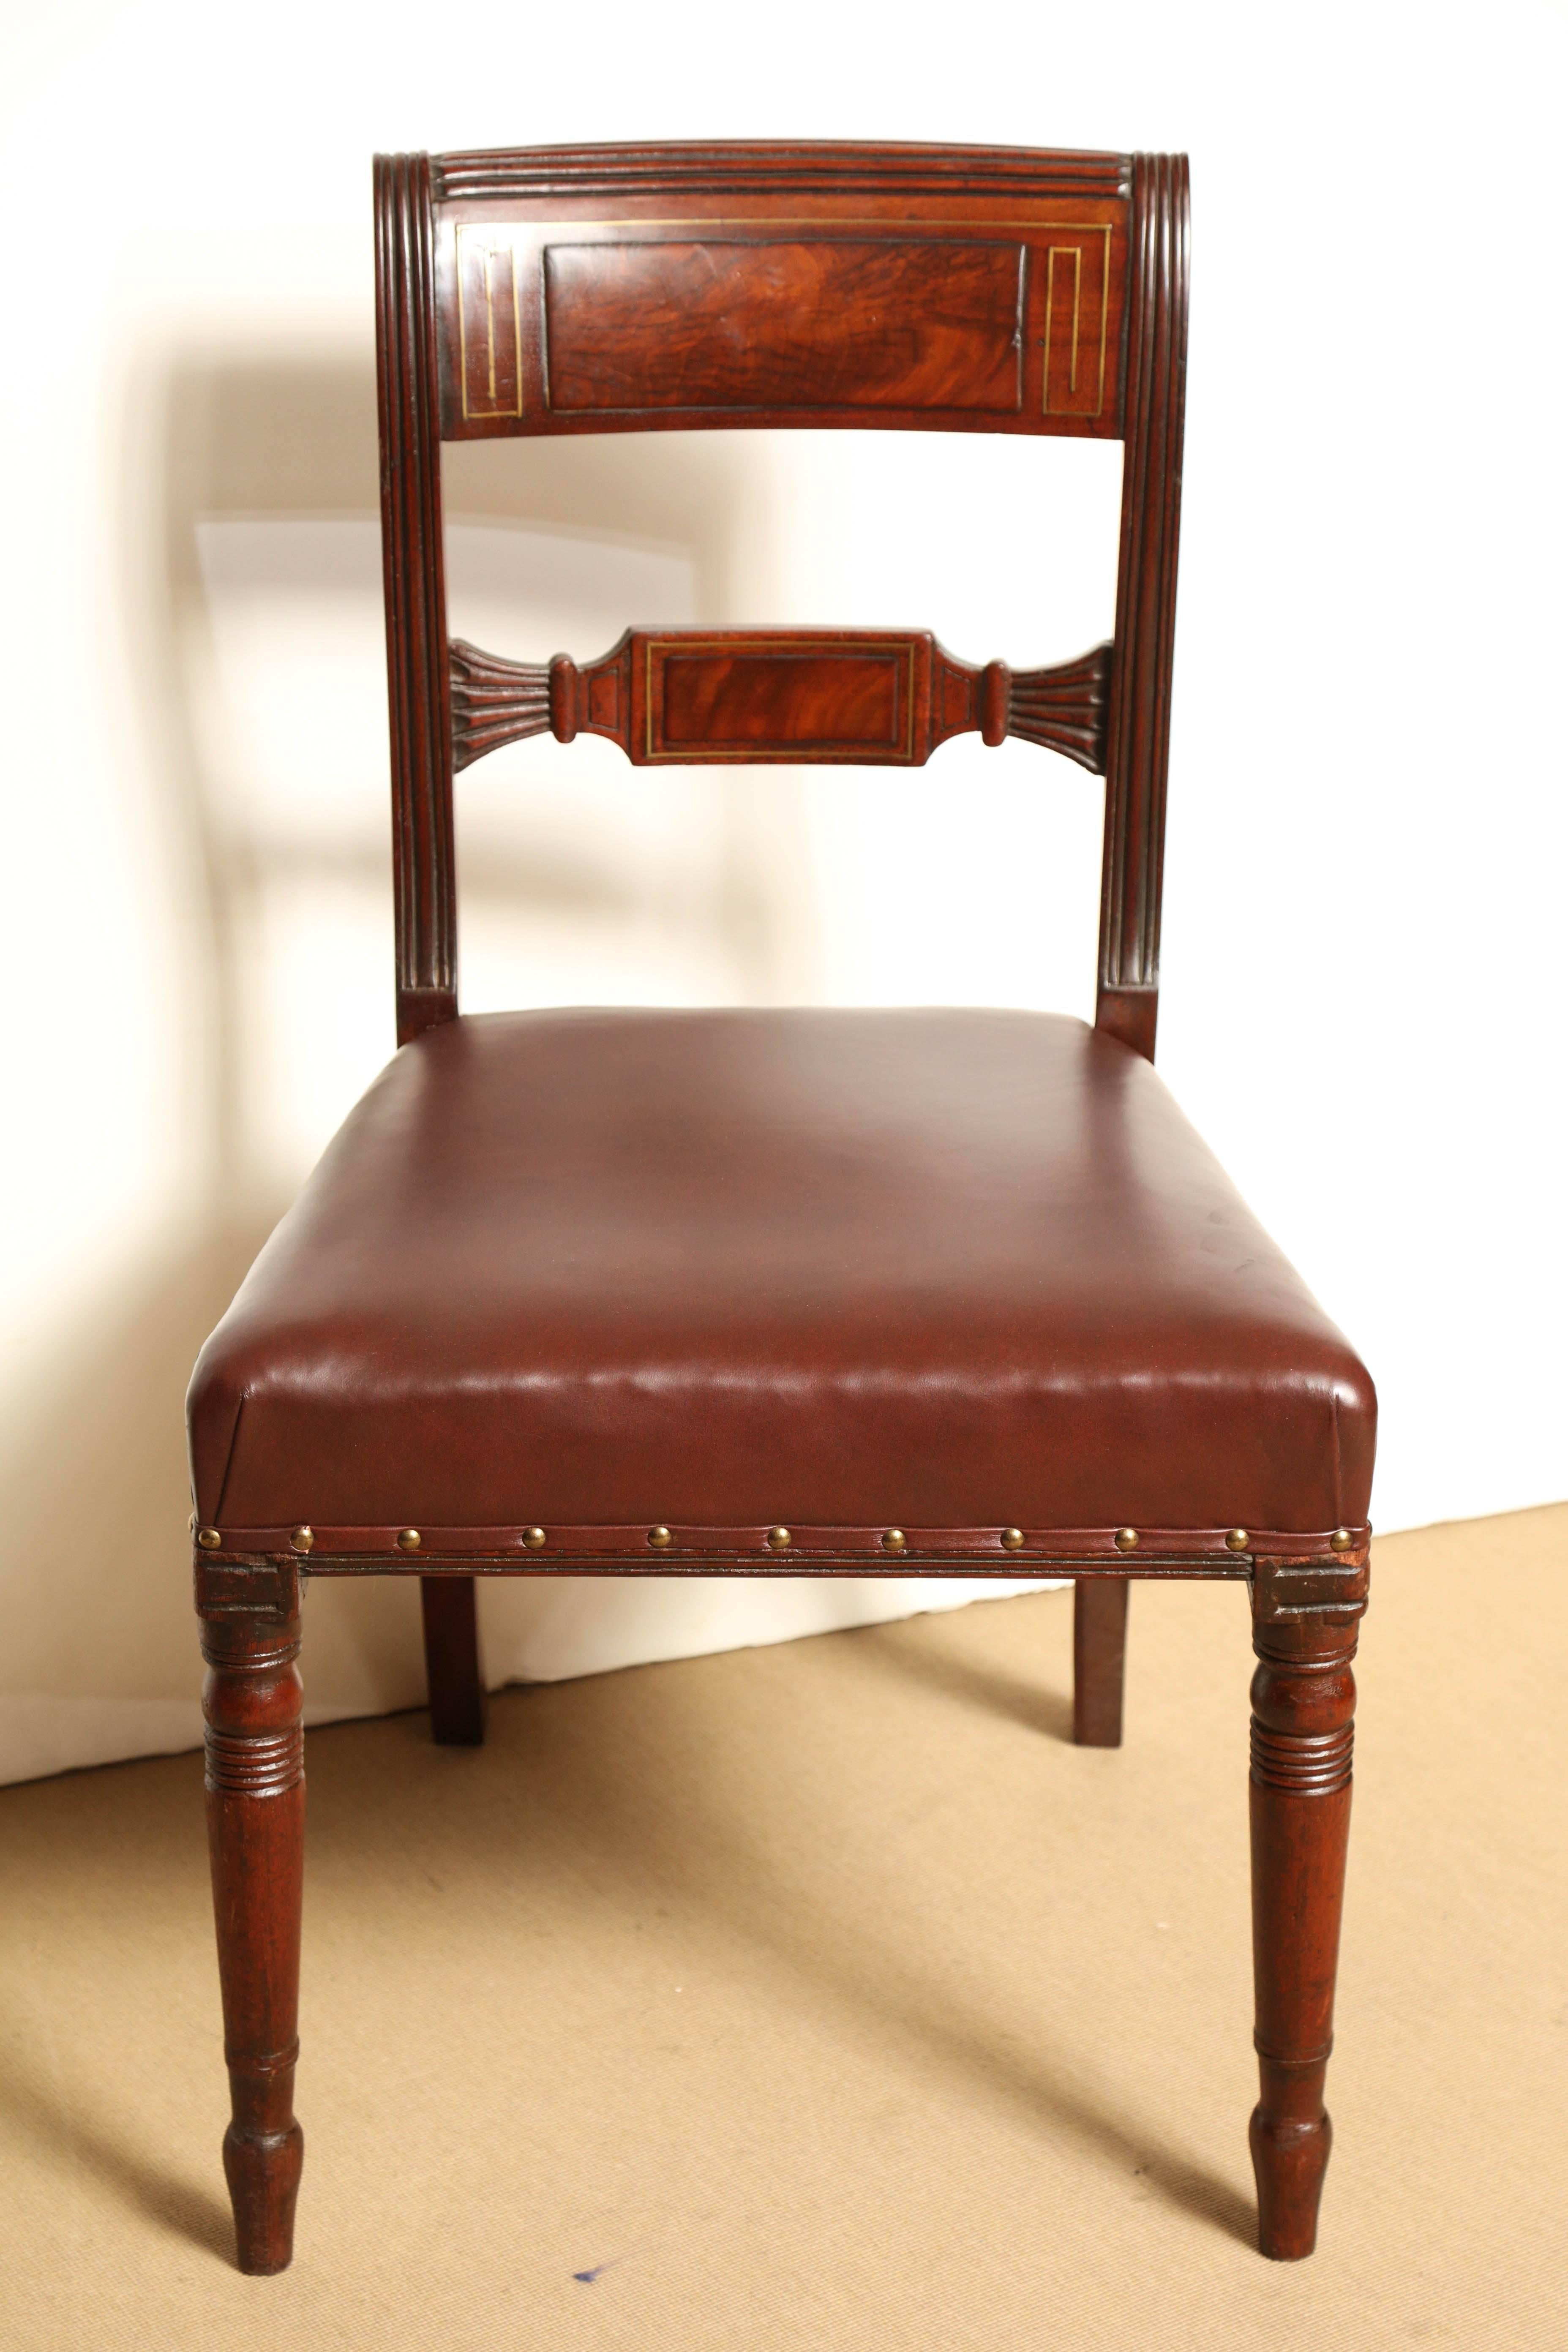 Mahogany Pair of Early 19th Century English Regency Side Chairs